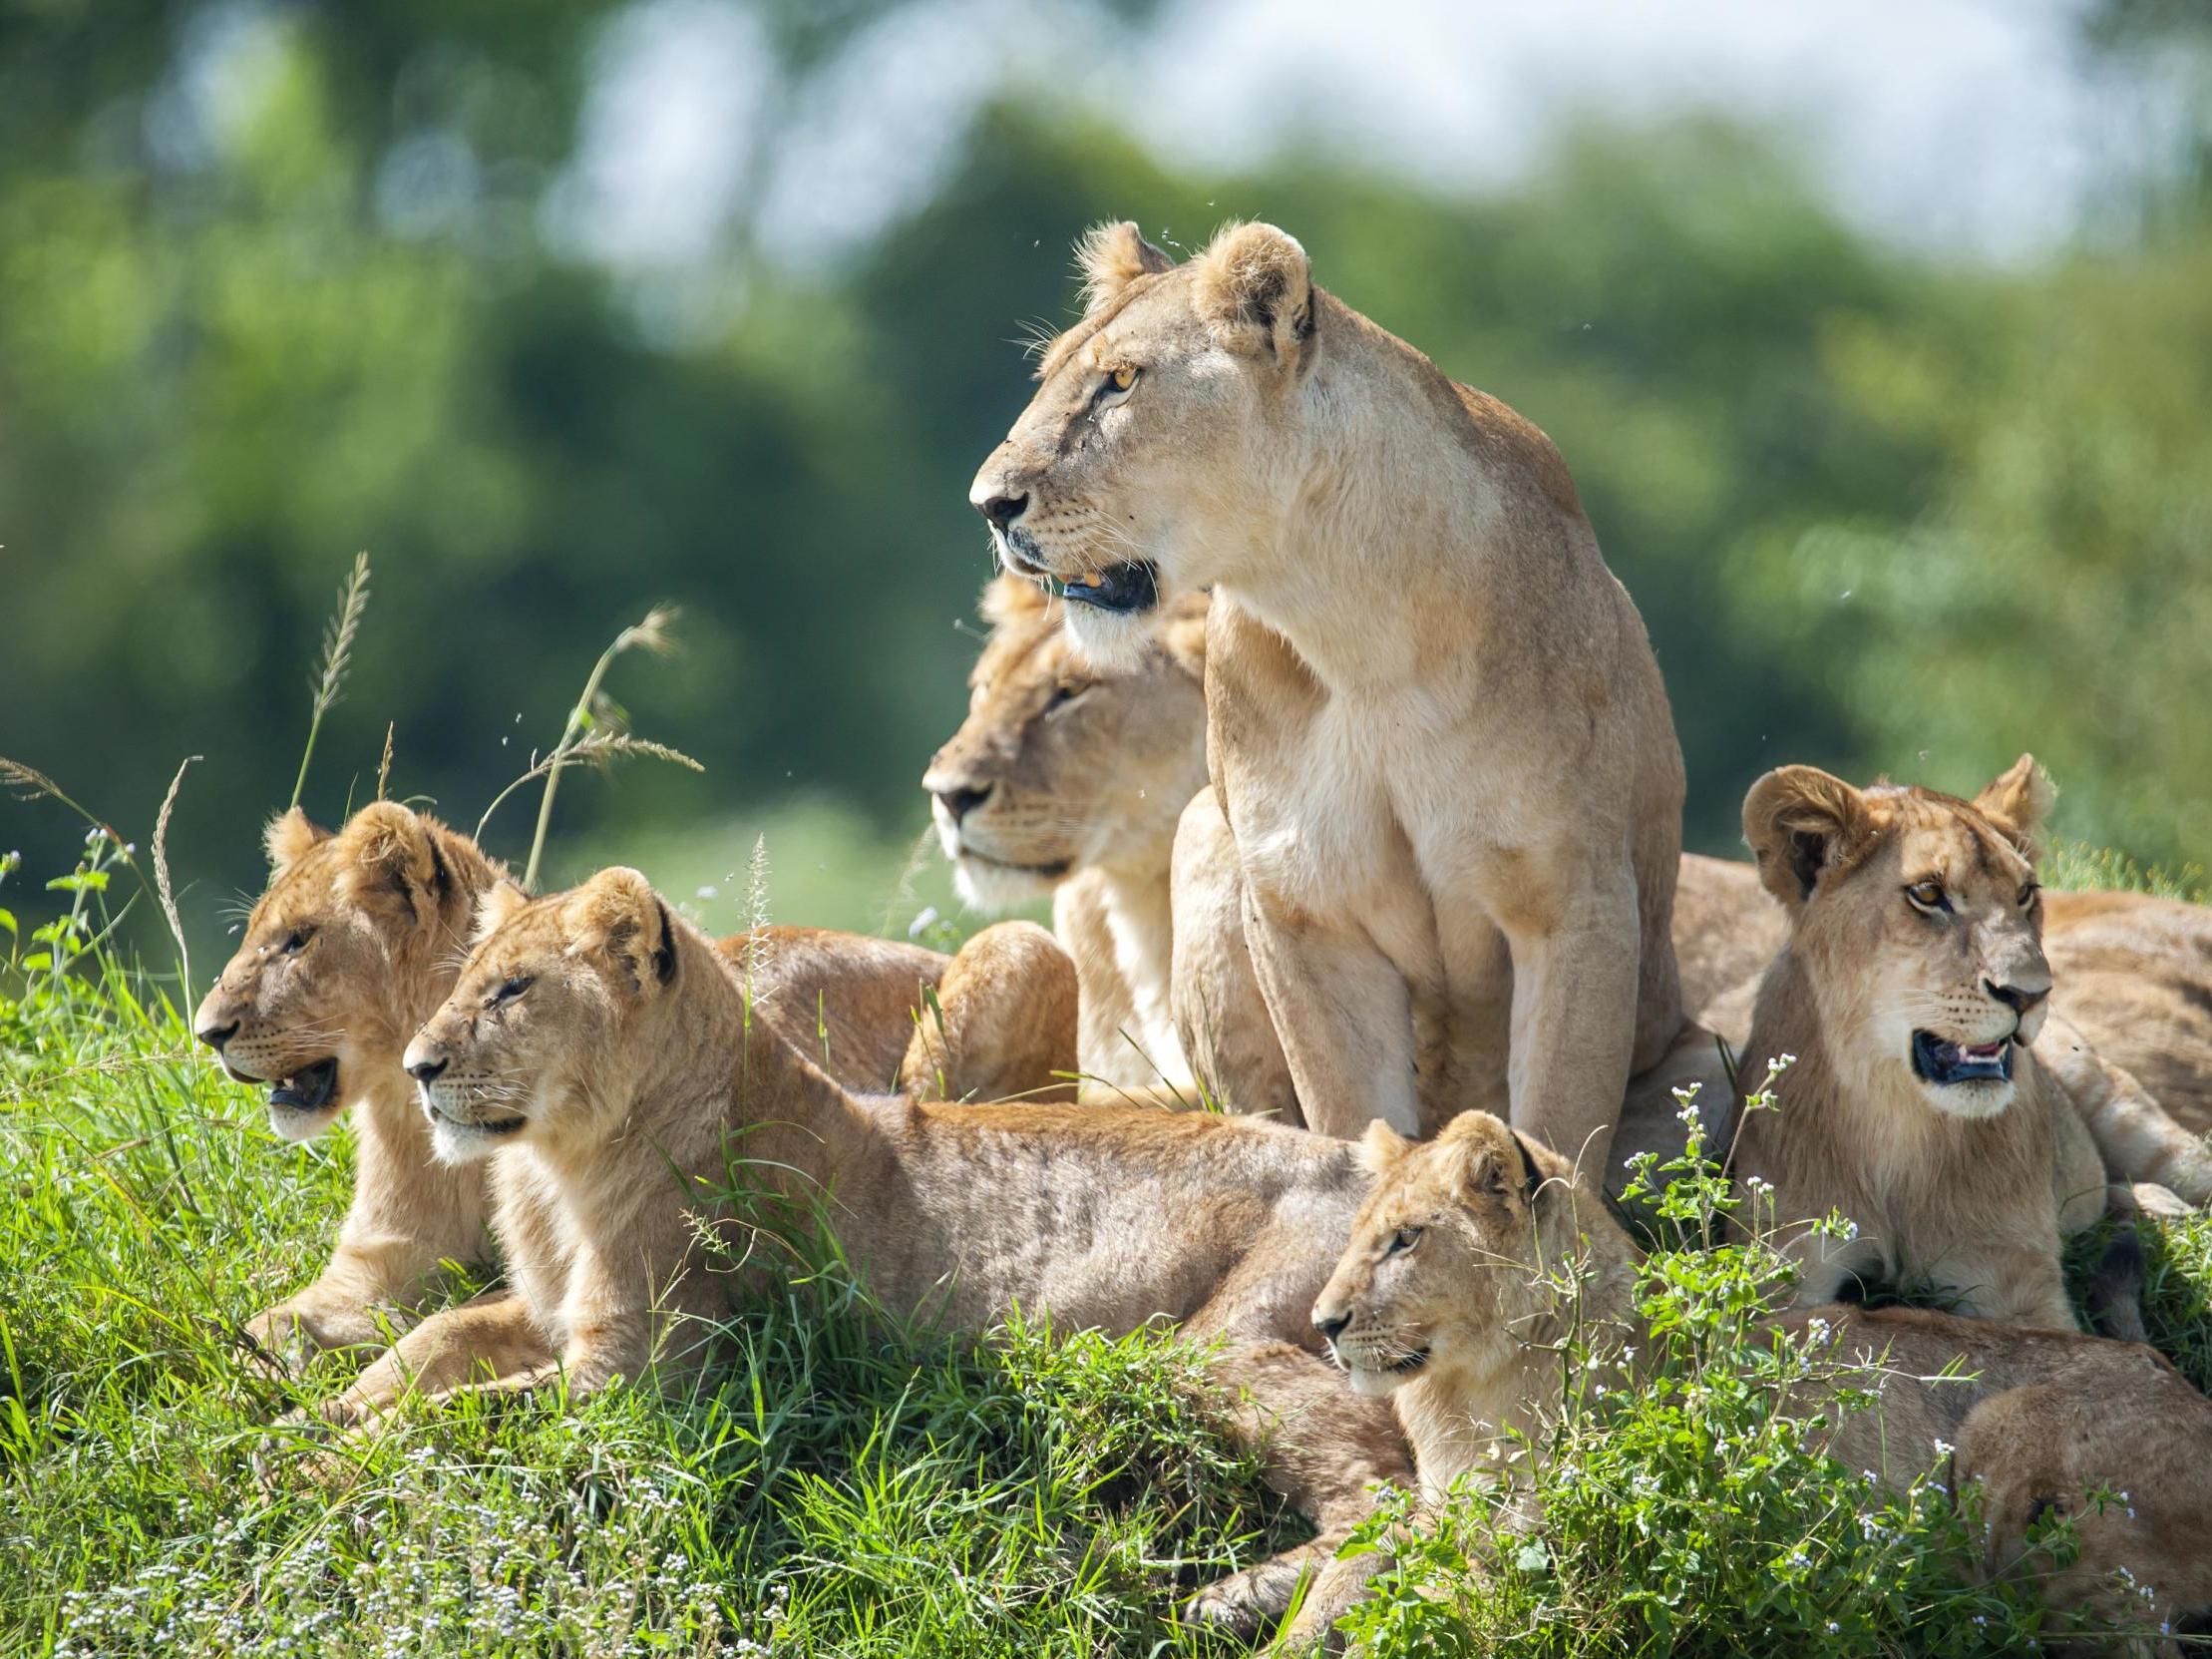 Where's dad? Male lions do not provide dependable help with rearing young